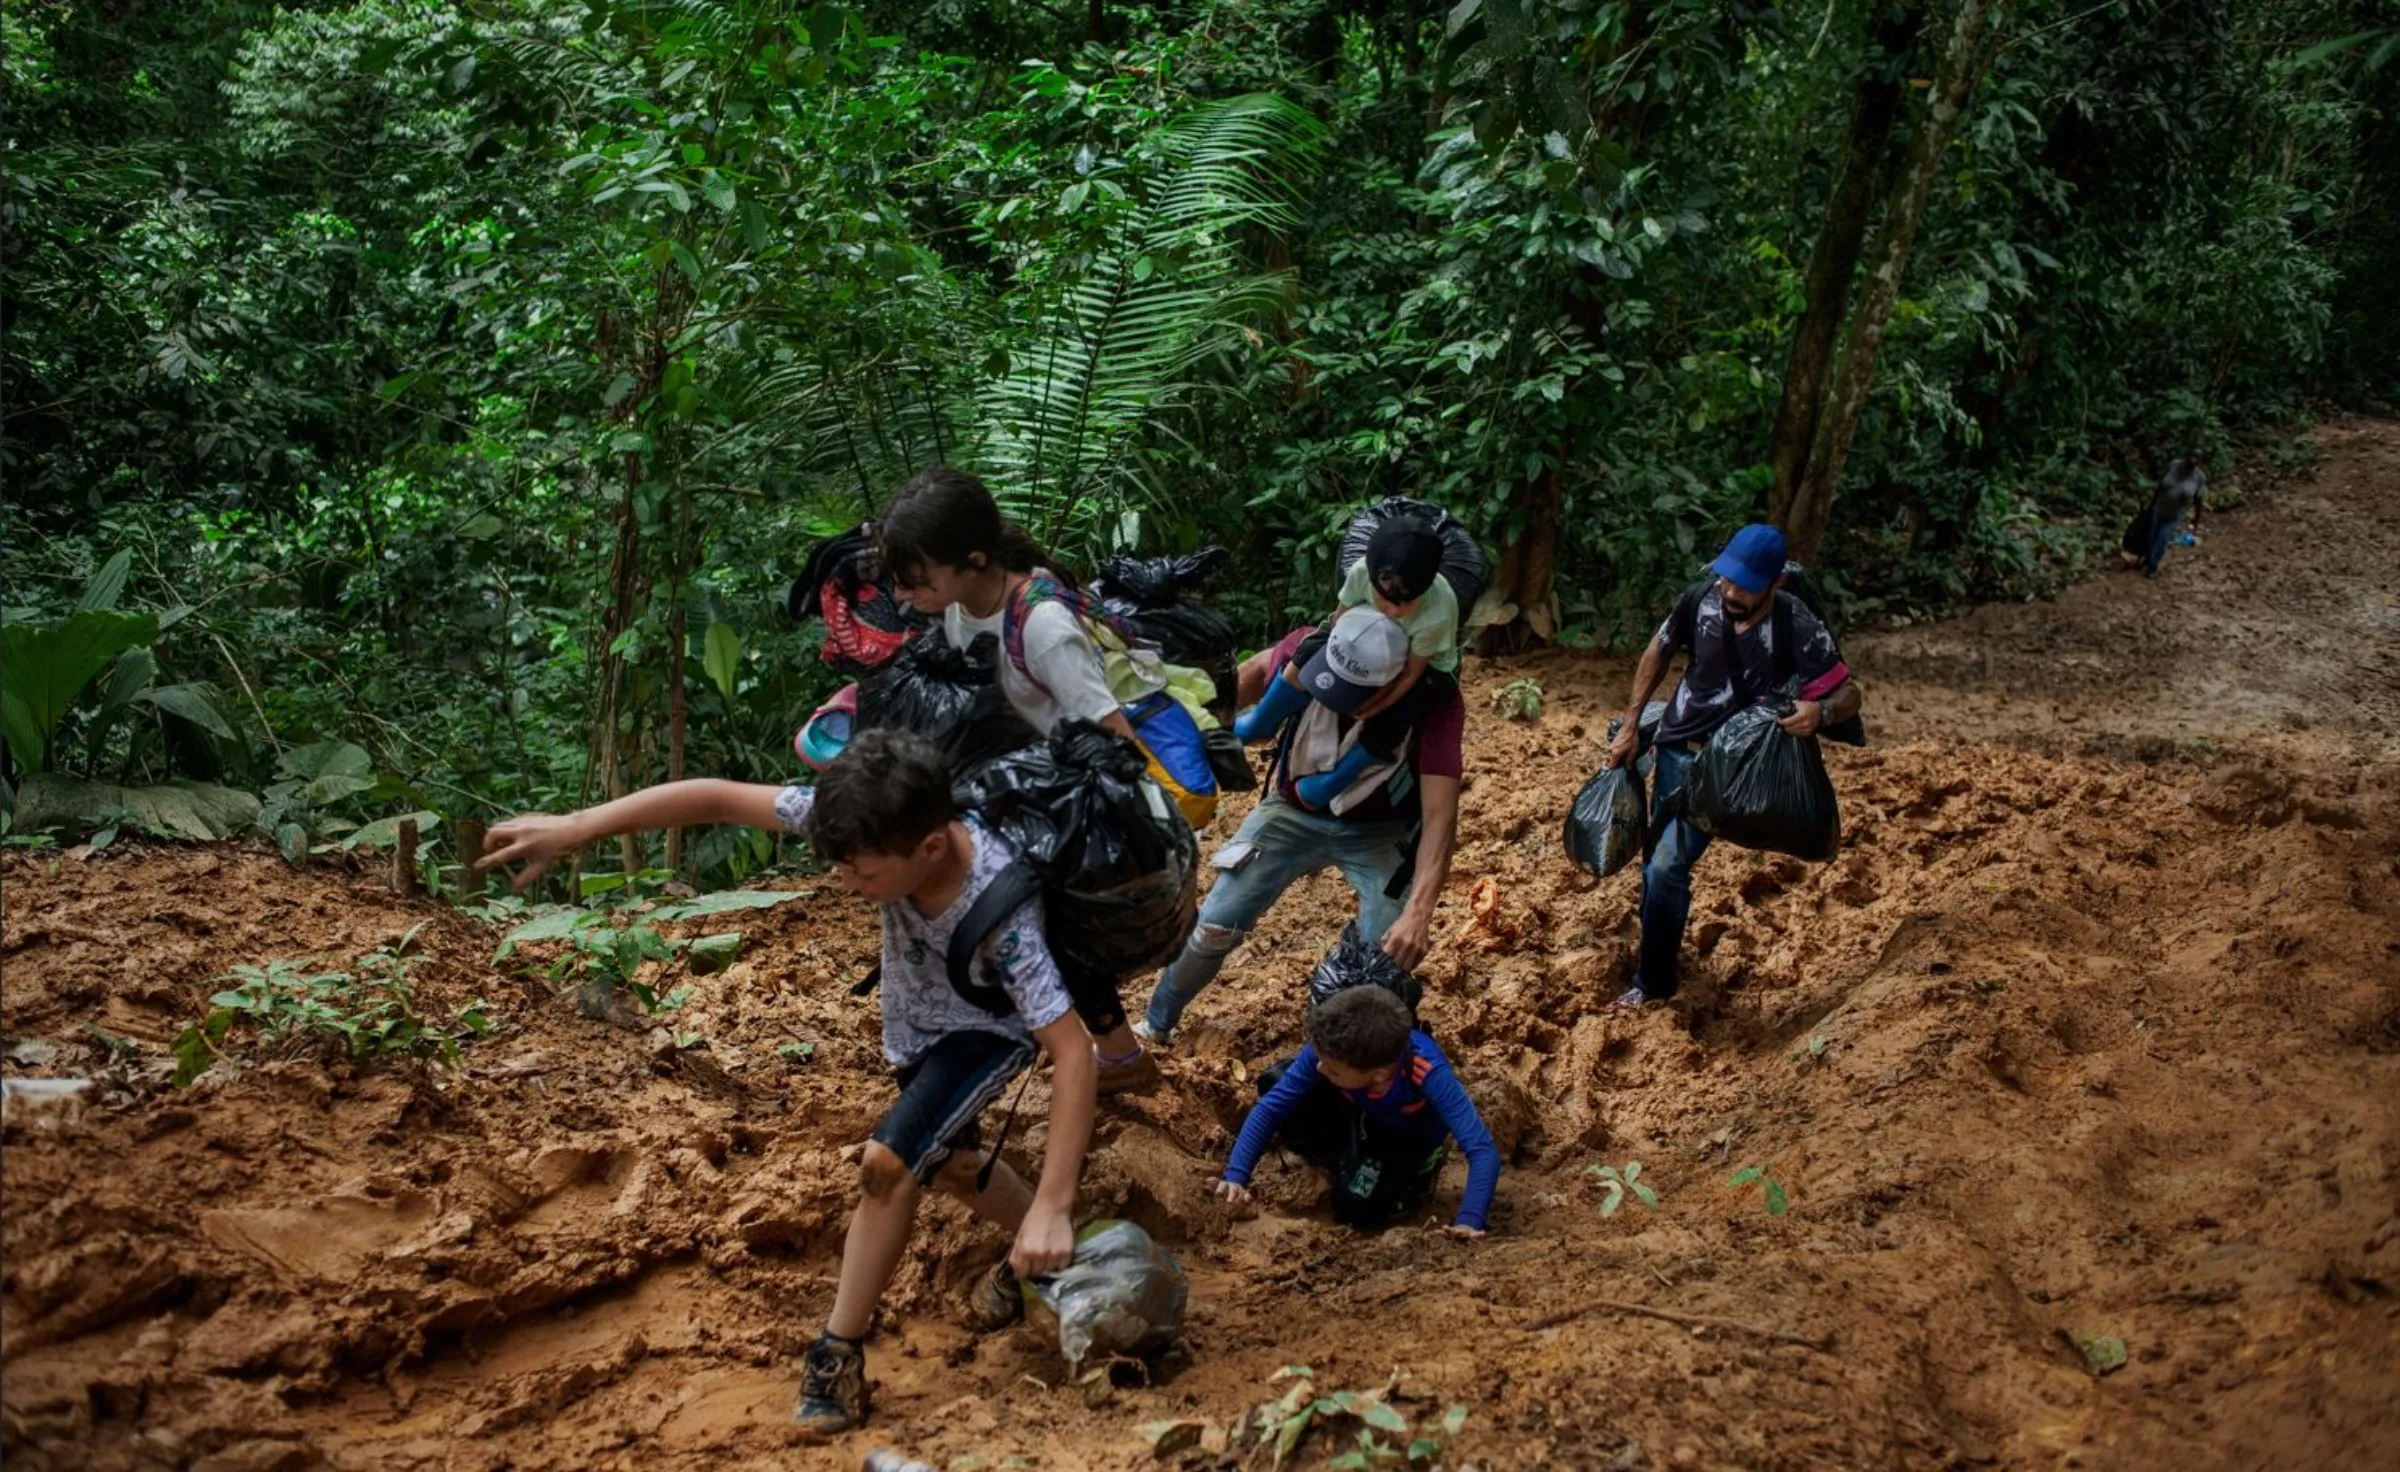 A family of Venezuelan migrants with young children walk through the Colombian jungle in the Darien Gap on day one of a five- to seven-day perilous and exhausting trek. Darién Gap, July 27, 2022. Thomson Reuters Foundation/Fabio Cuttica